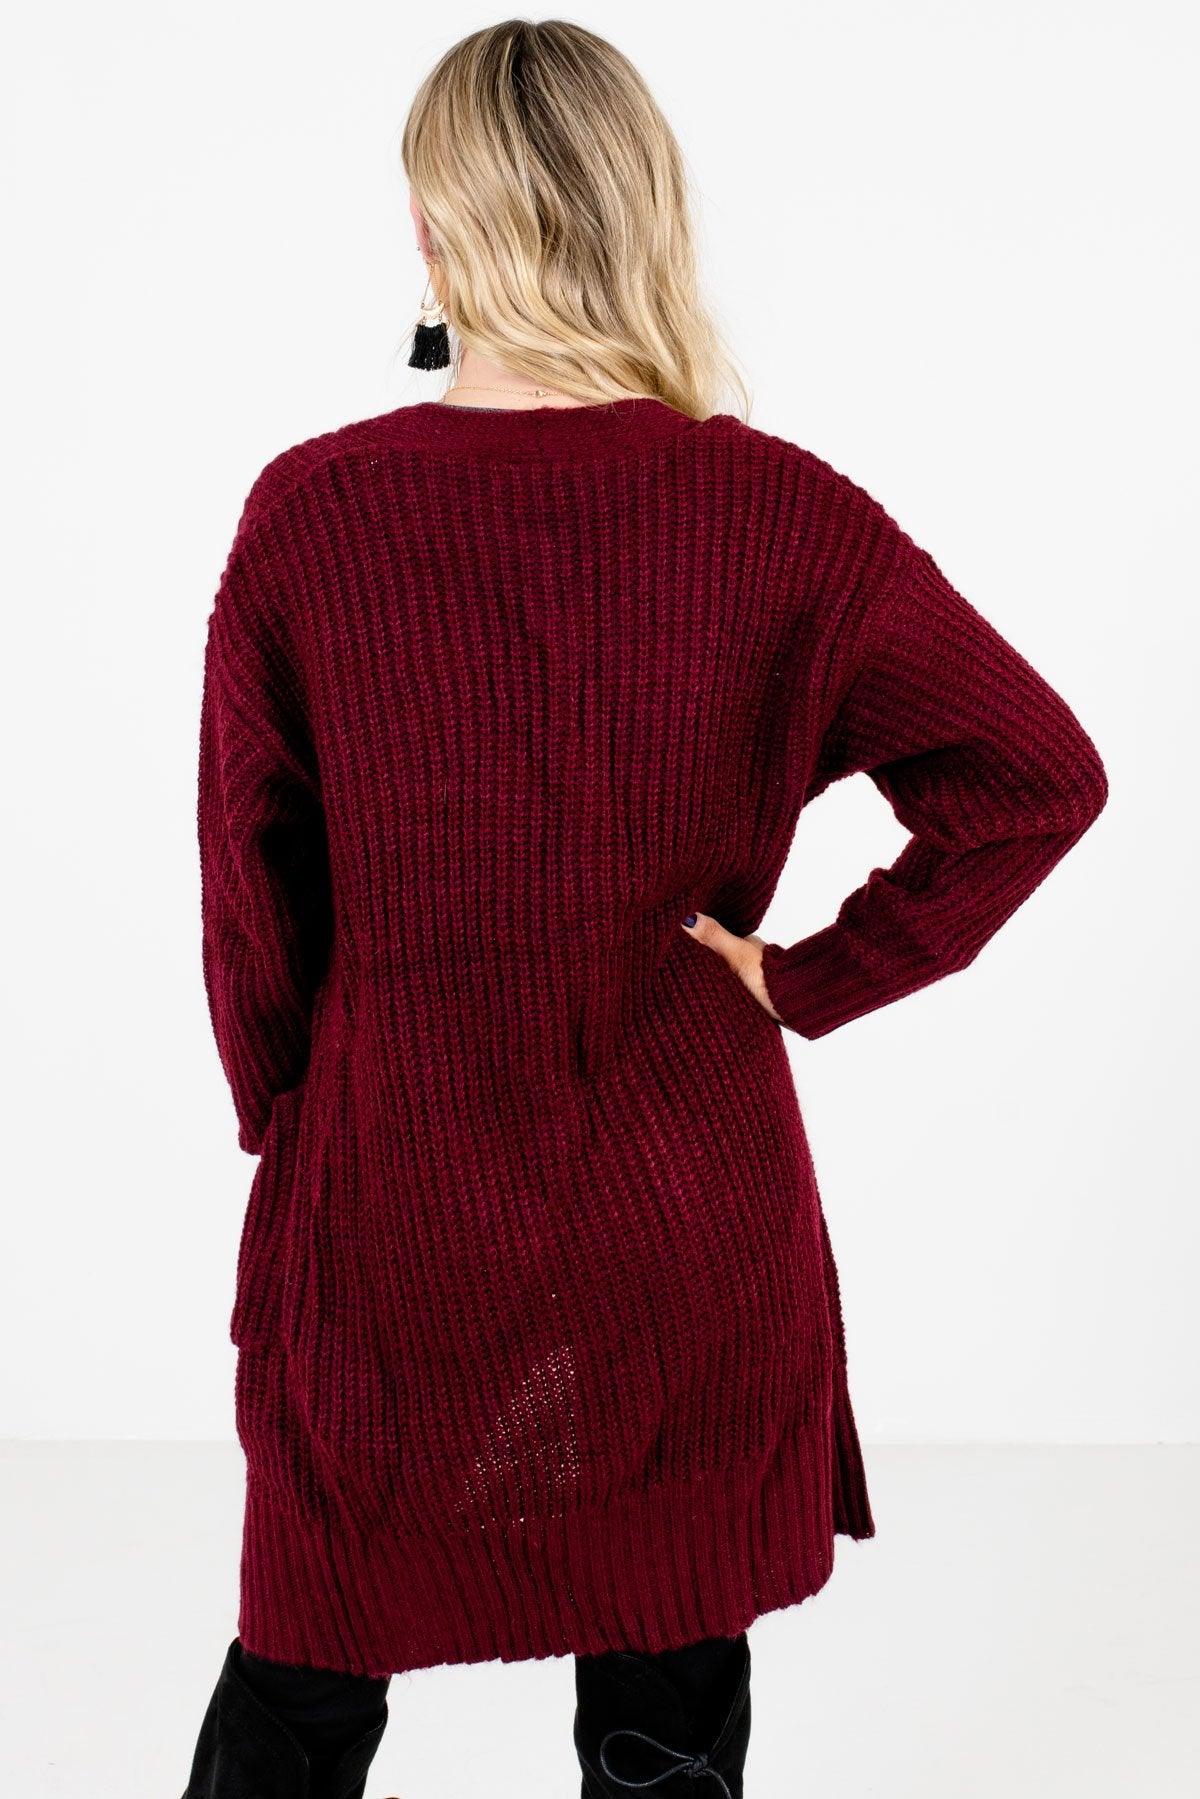 Women’s Burgundy Boutique Cardigans with Pockets